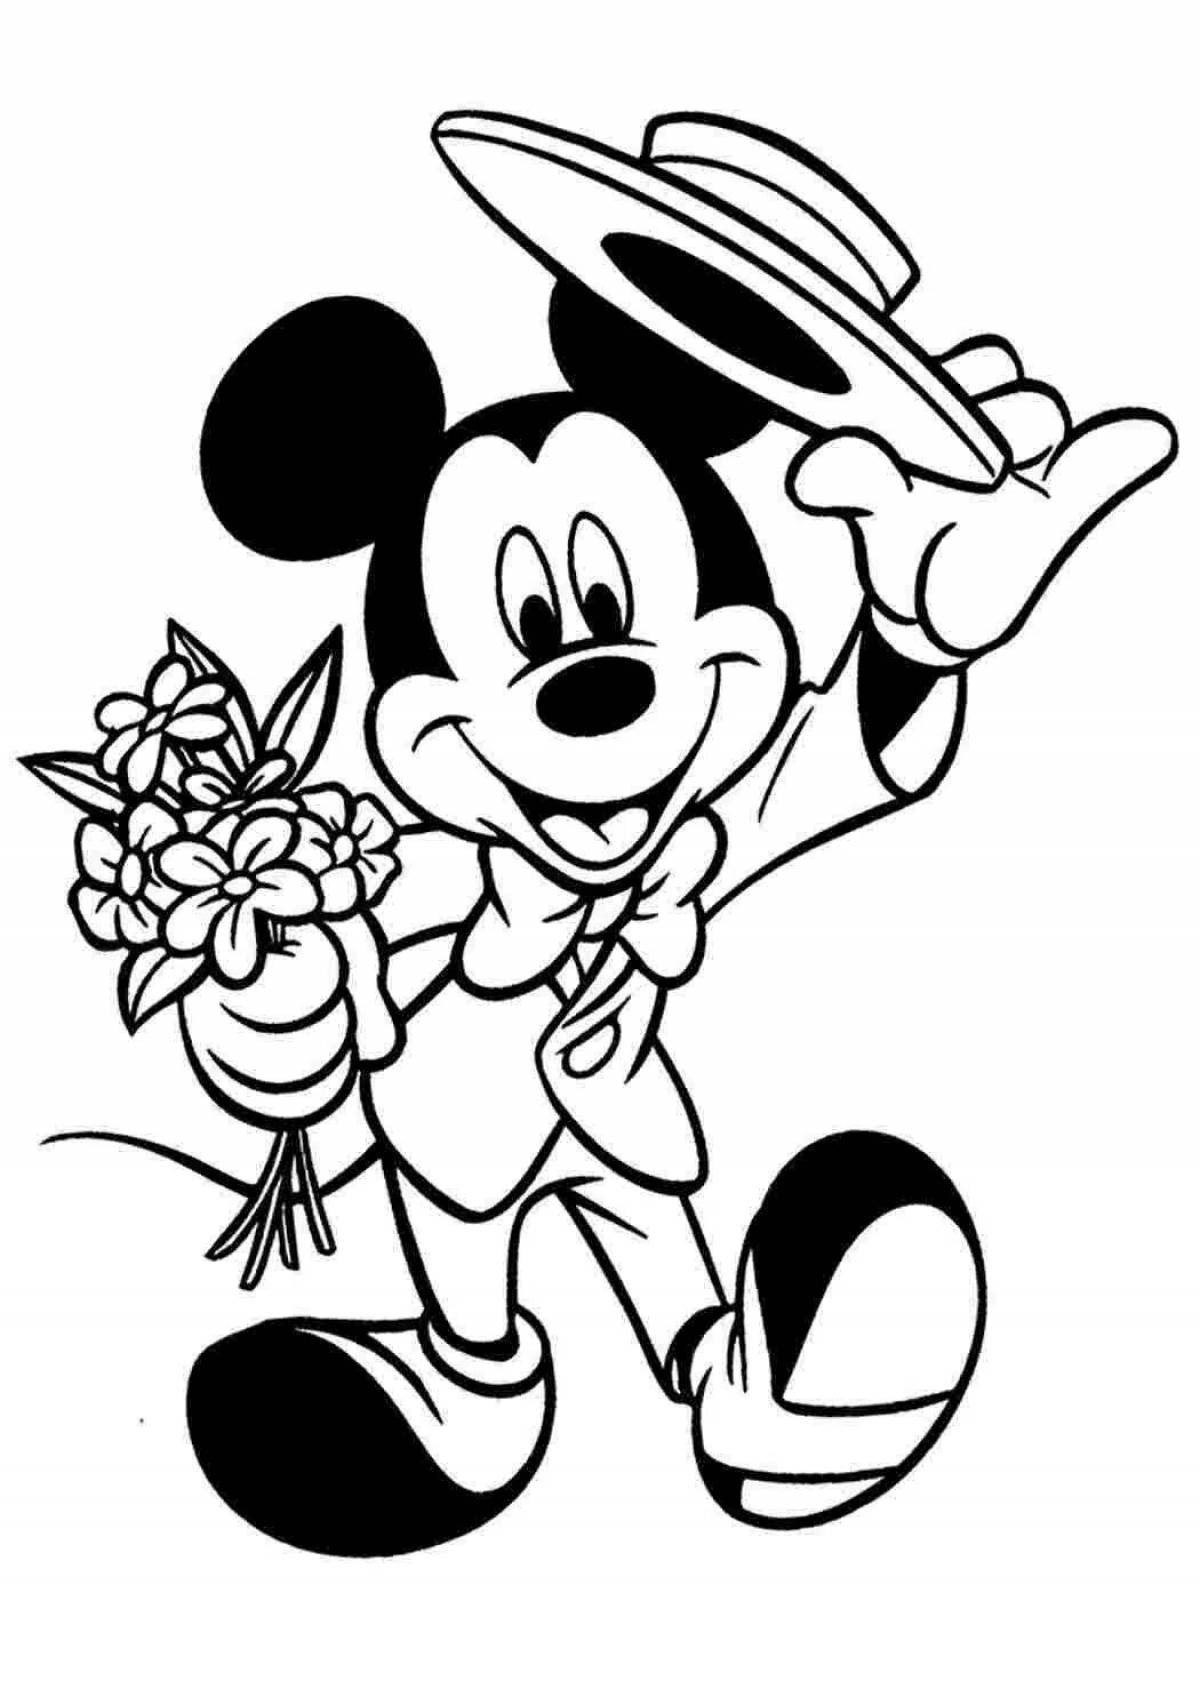 Mickey mouse fun coloring for boys